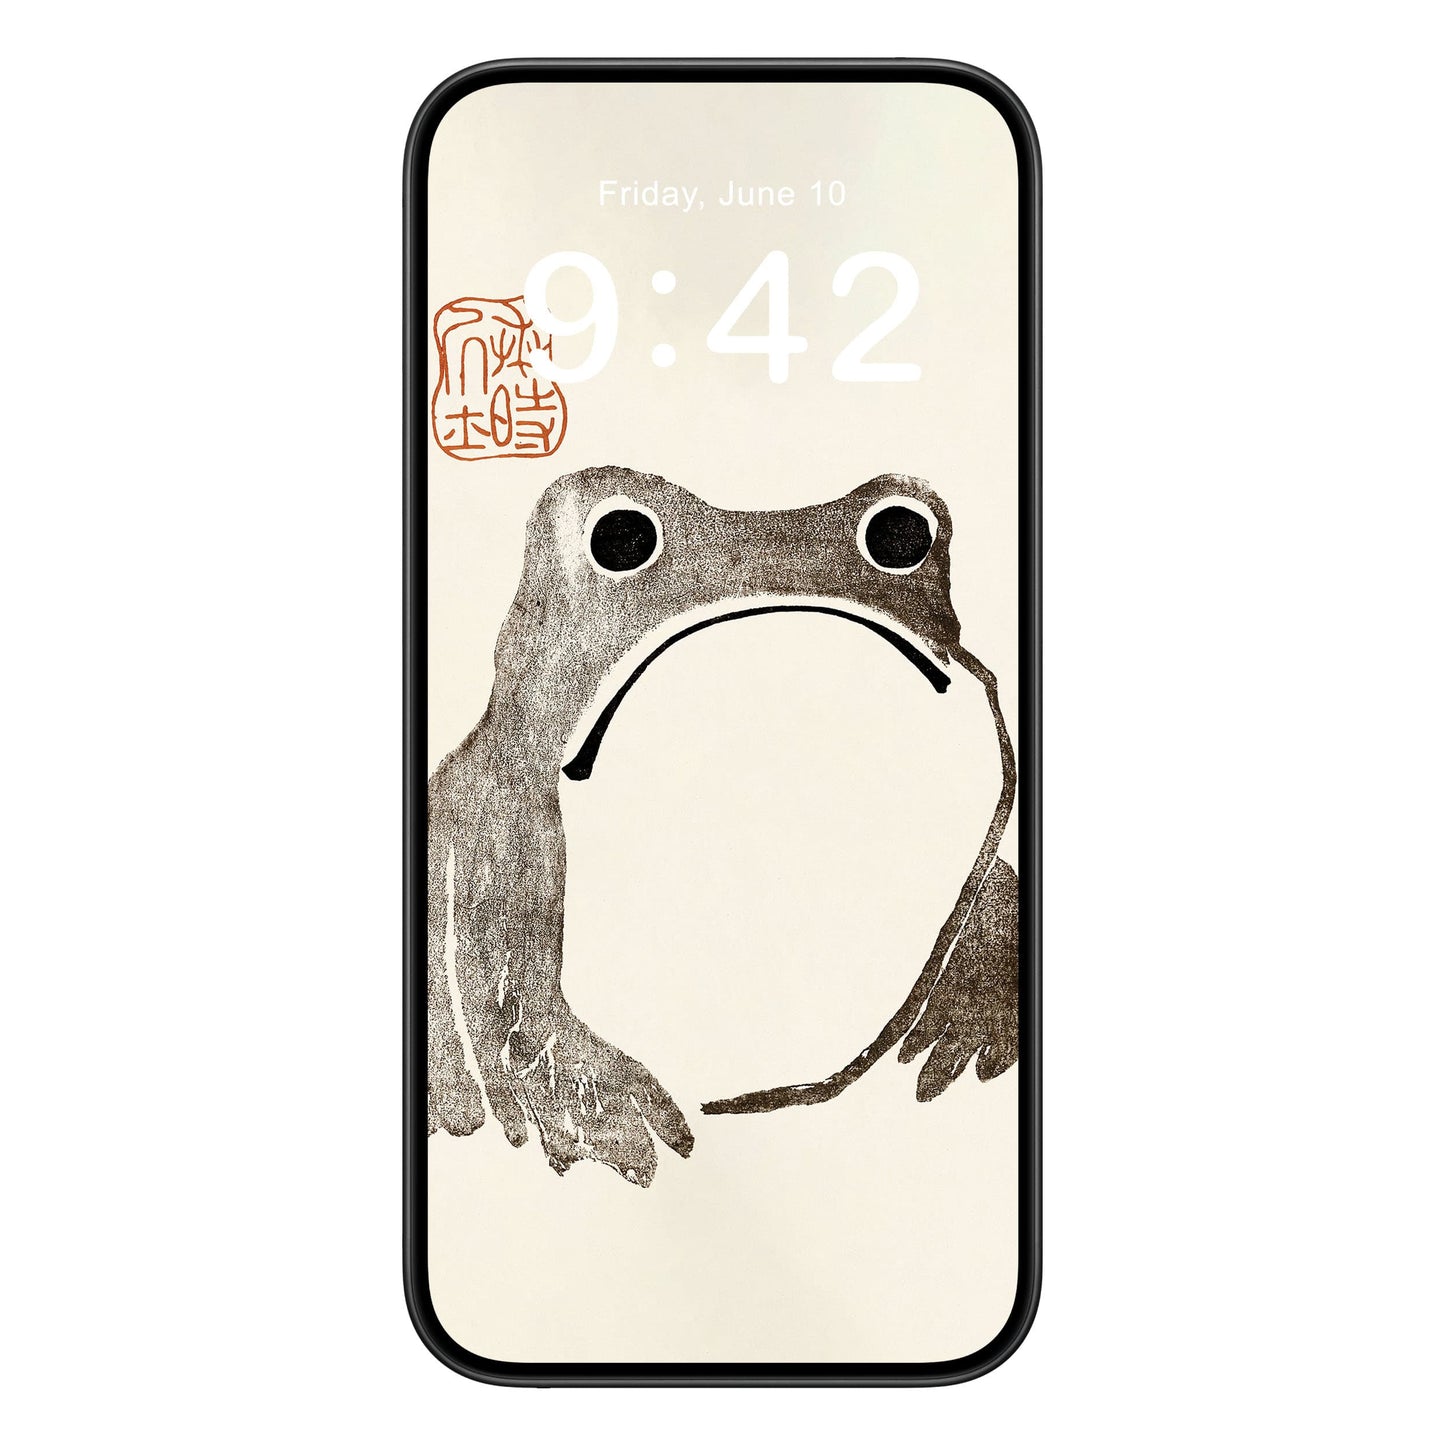 Grumpy Frog phone wallpaper background with sad frog design shown on a phone lock screen, instant download available.